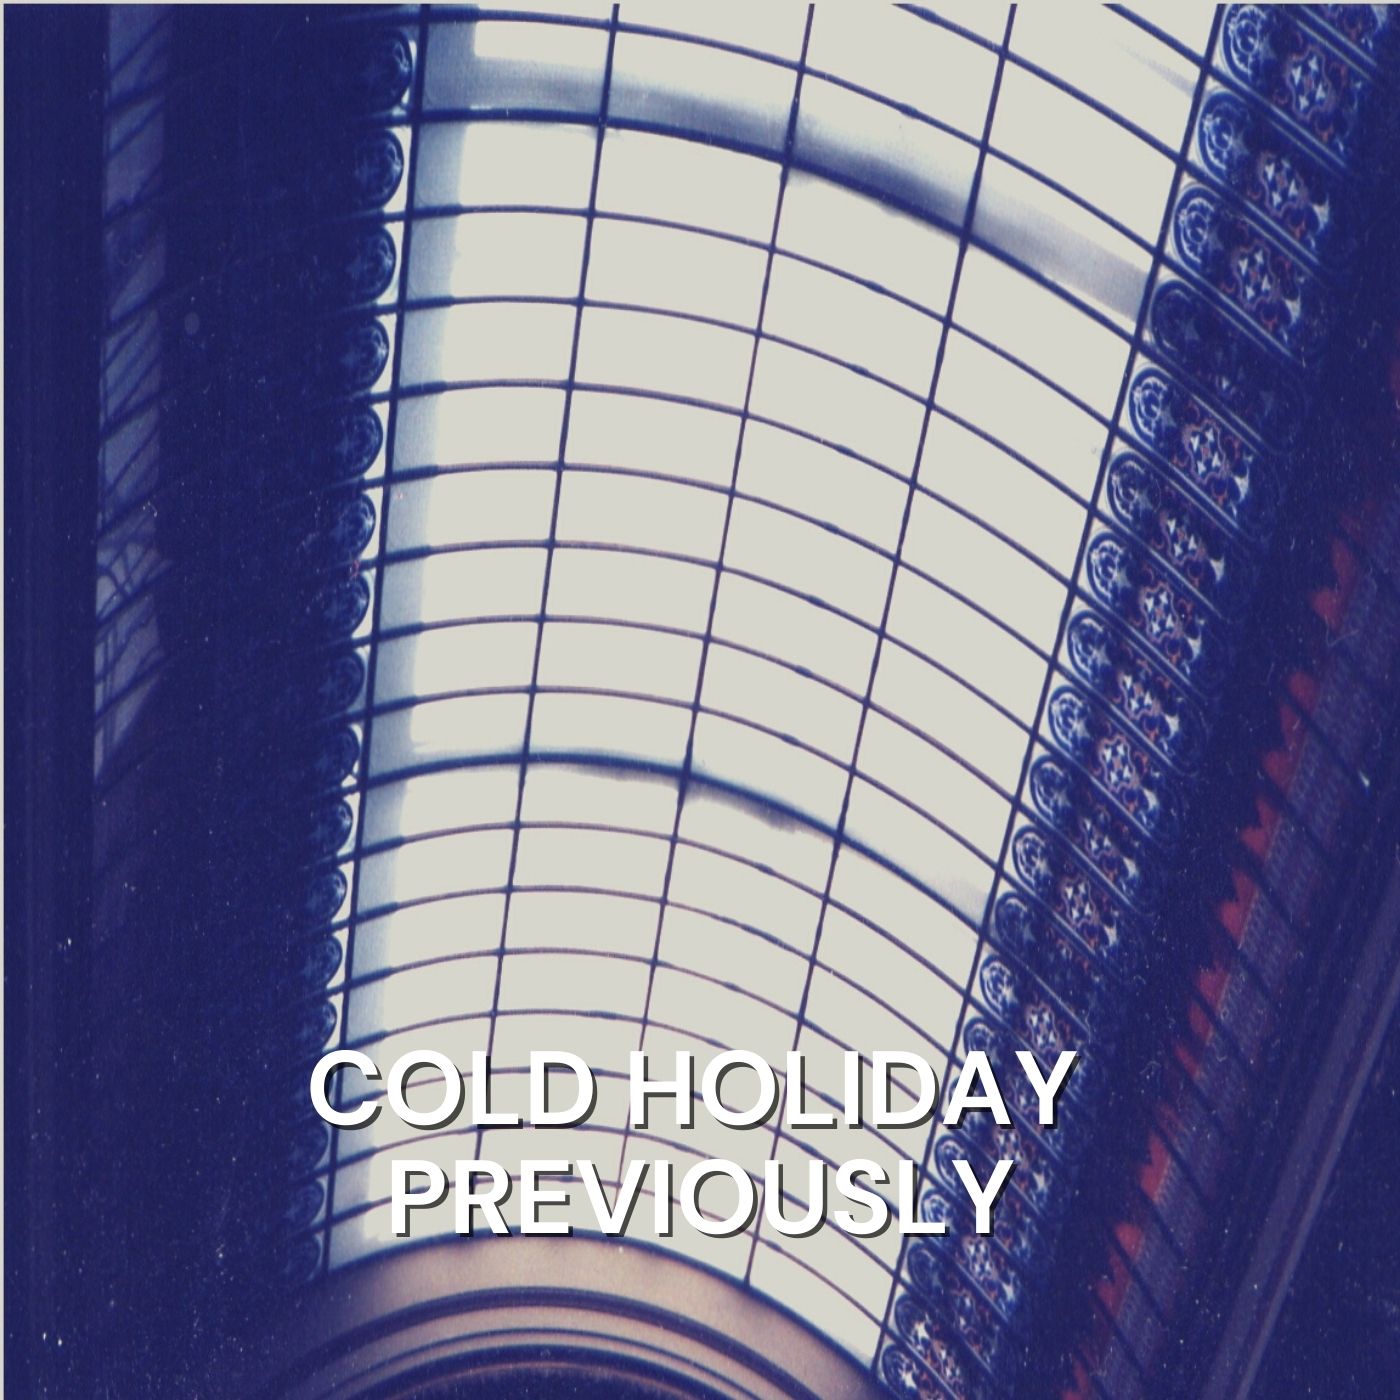 Cover for "Previously" by Cold Holiday